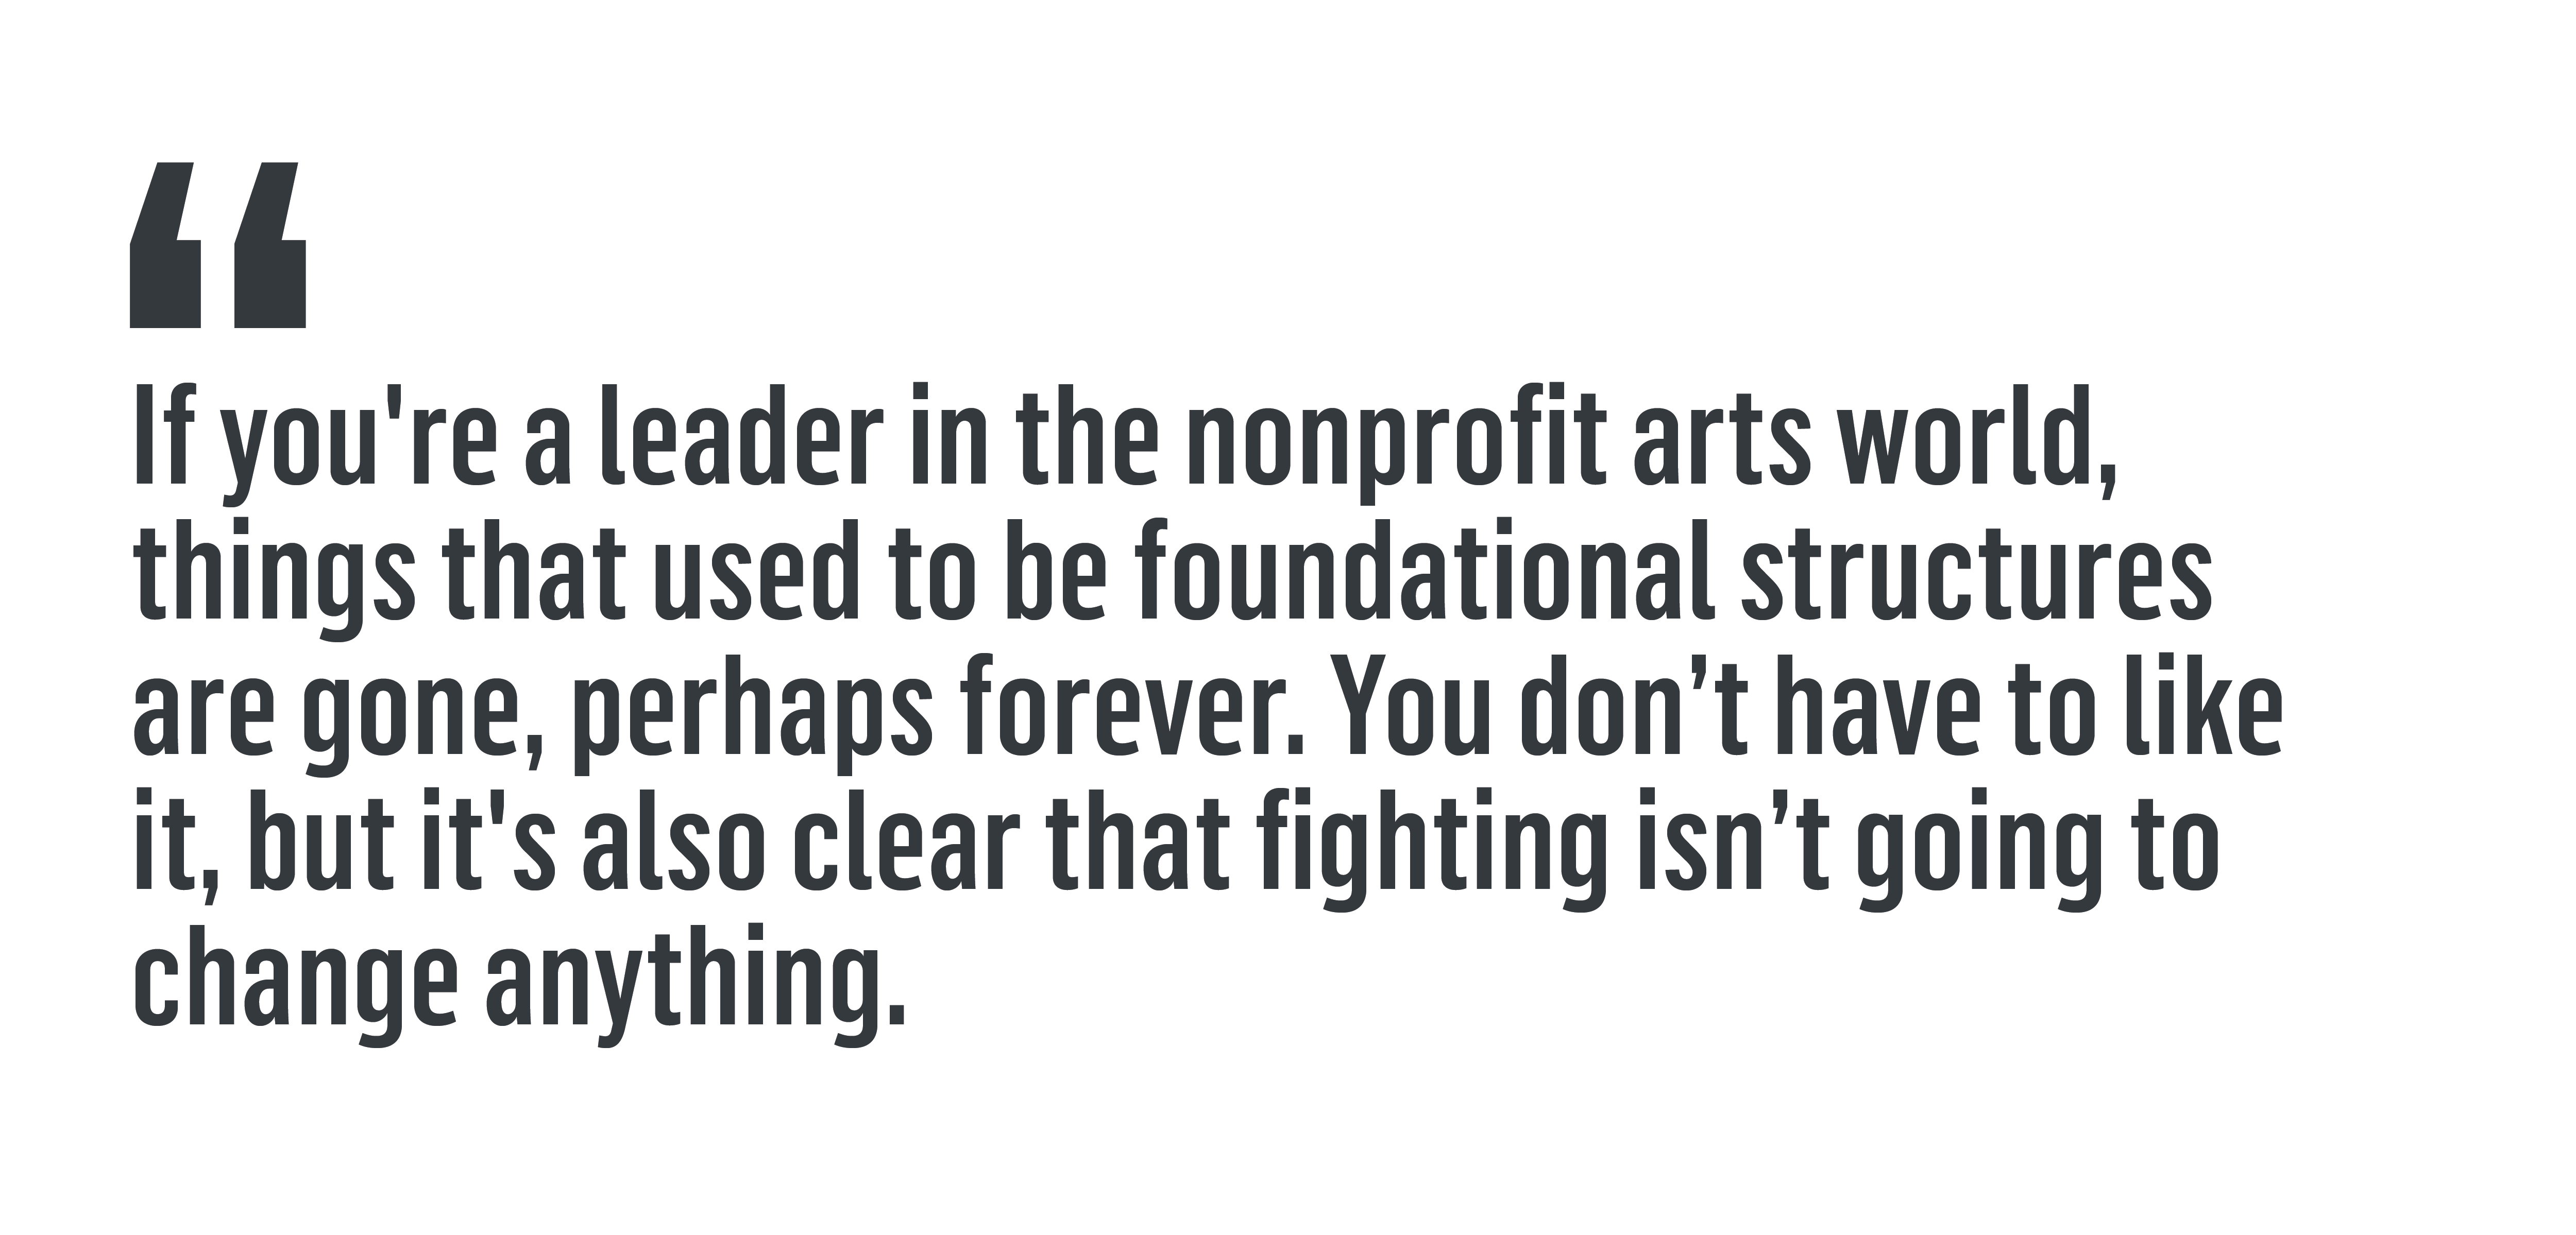 “If you're a leader in the nonprofit arts world, things that used to be foundational structures are gone, perhaps forever. You don’t have to like it, but it's also clear that fighting isn’t going to change anything.”